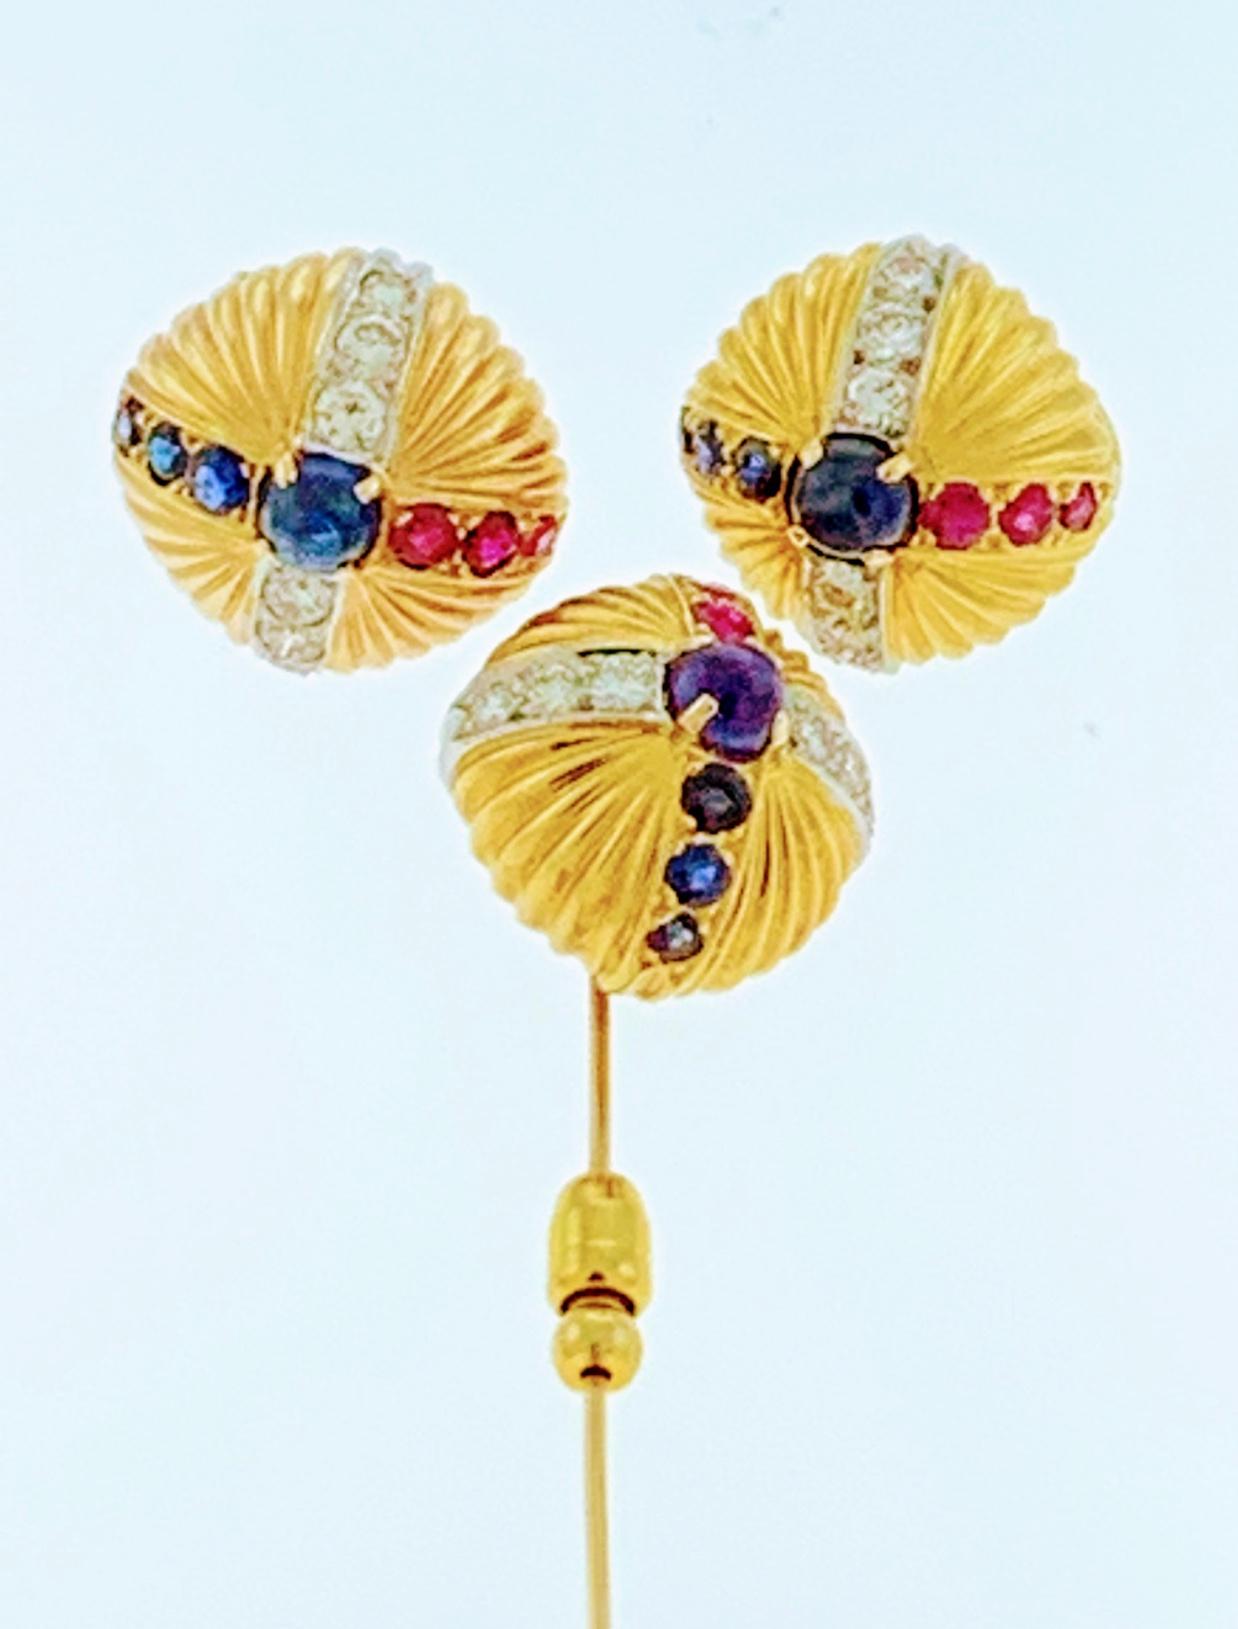  18 Karat Yellow Gold Ruby Sapphire & Diamond Earring And  Stick Pin Set Estate
Each earring has one round Cabochon sapphire in the center and three rubies and three sapphires with brilliant cut diamonds to form a cross.
Stick pin has same pattern